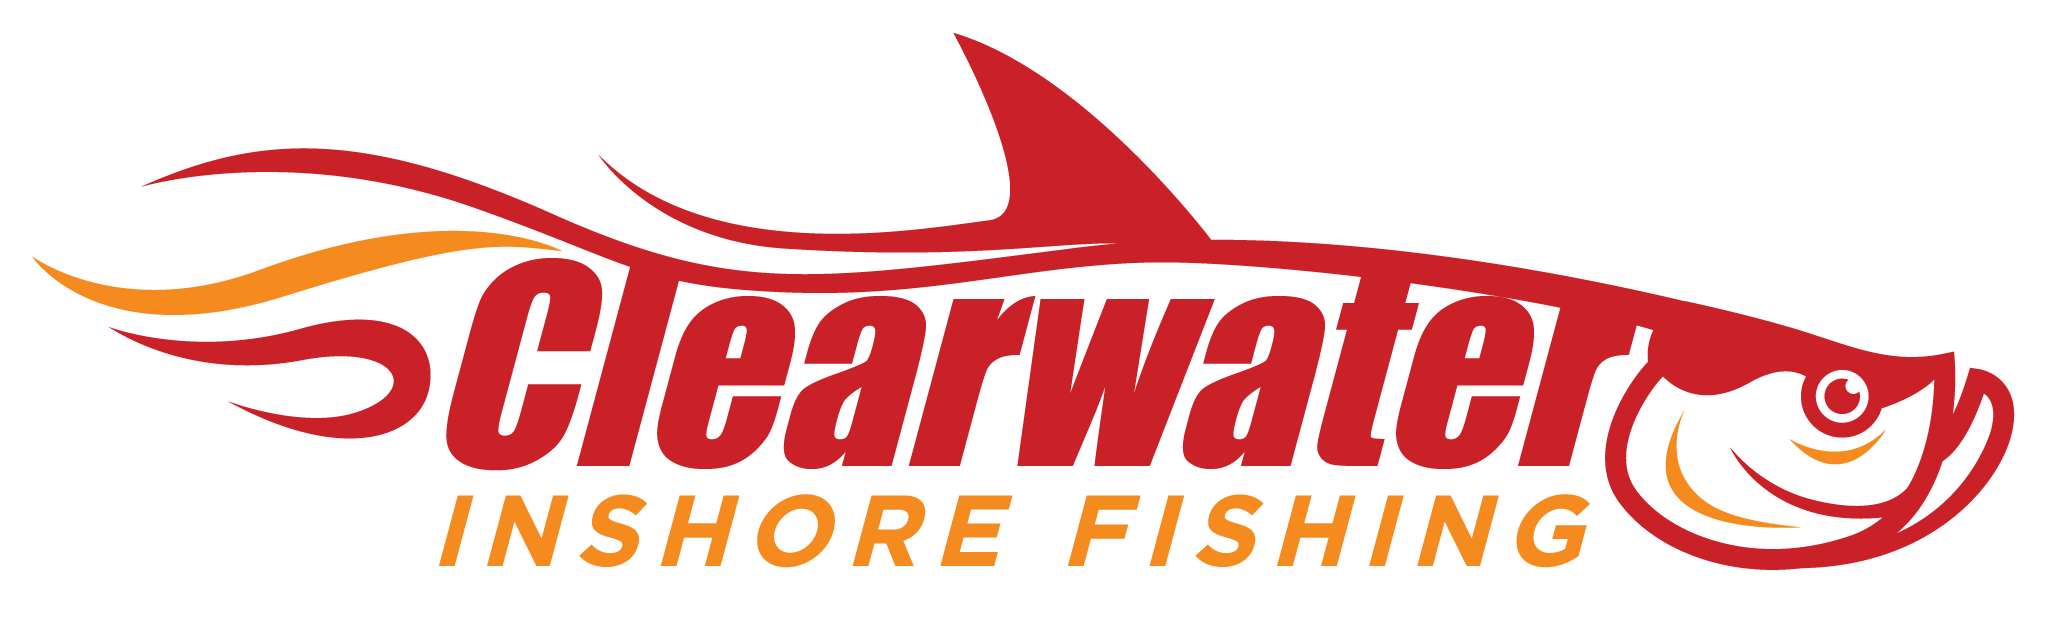 Clearwater Inshore Fishing Report for March